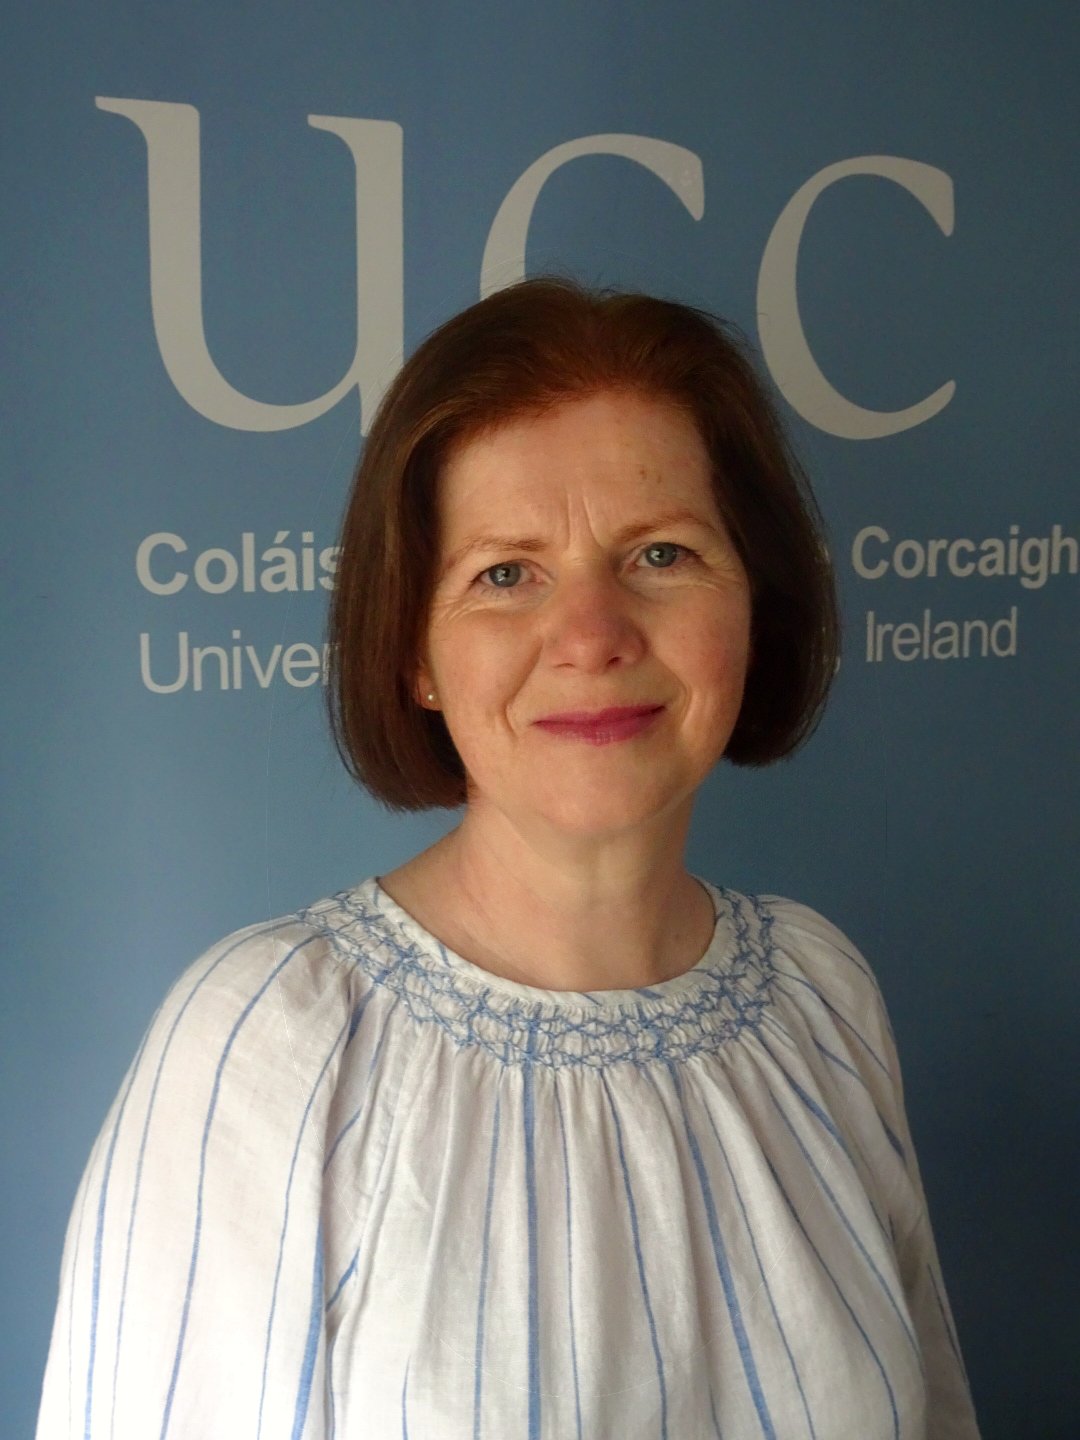 UCC School of Law’s Dr Fidelma White appointed as Advisor to Attorney General’s Working Group on Consumer Rights Bill 2021